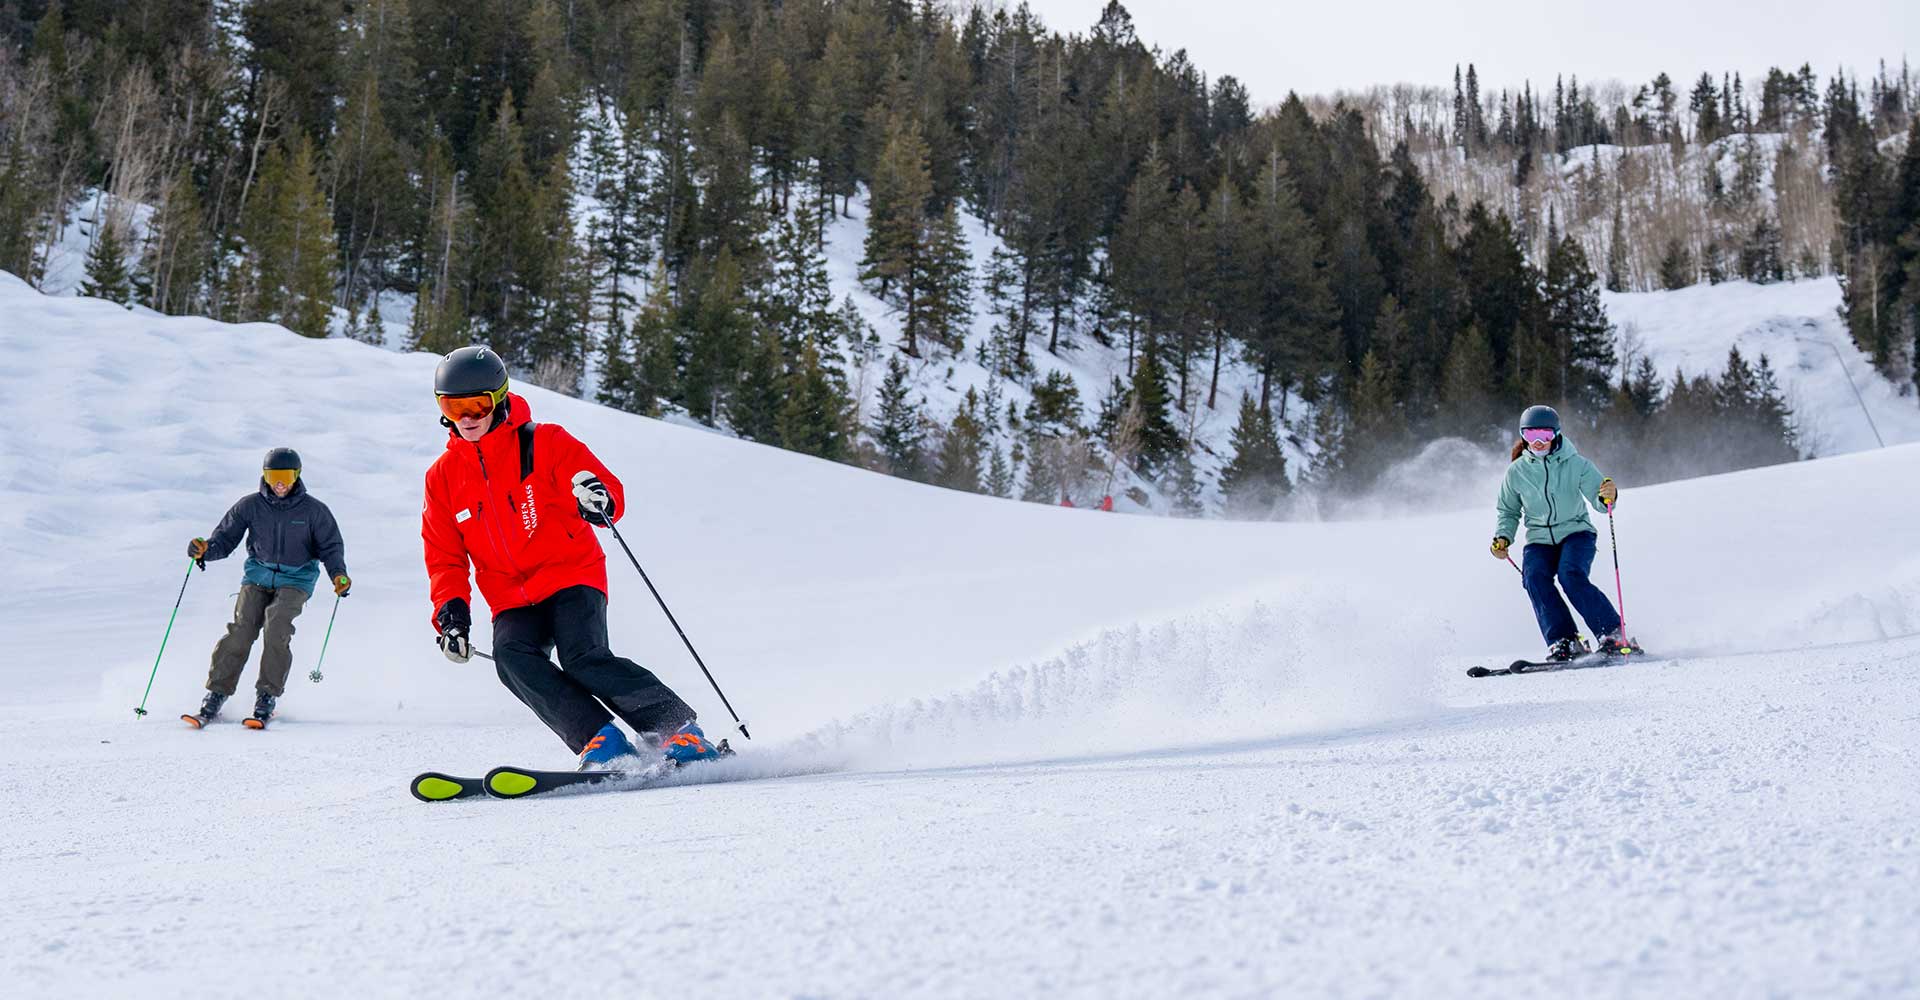 Ski instructor leads a group down a blue run at Aspen Mountain